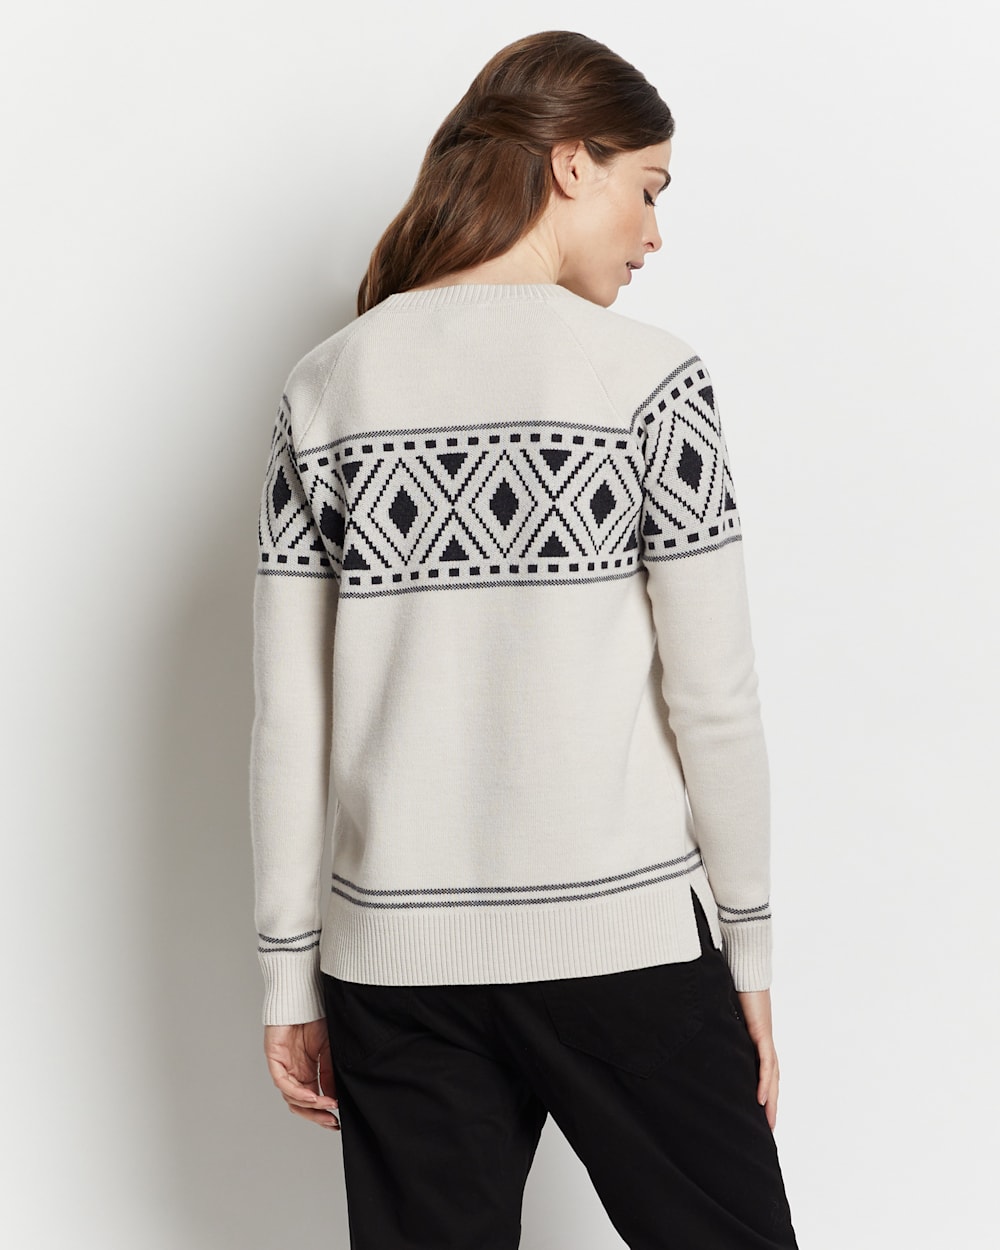 ALTERNATE VIEW OF WOMEN'S GRAPHIC MERINO CREWNECK SWEATER IN IVORY/CHARCOAL image number 4